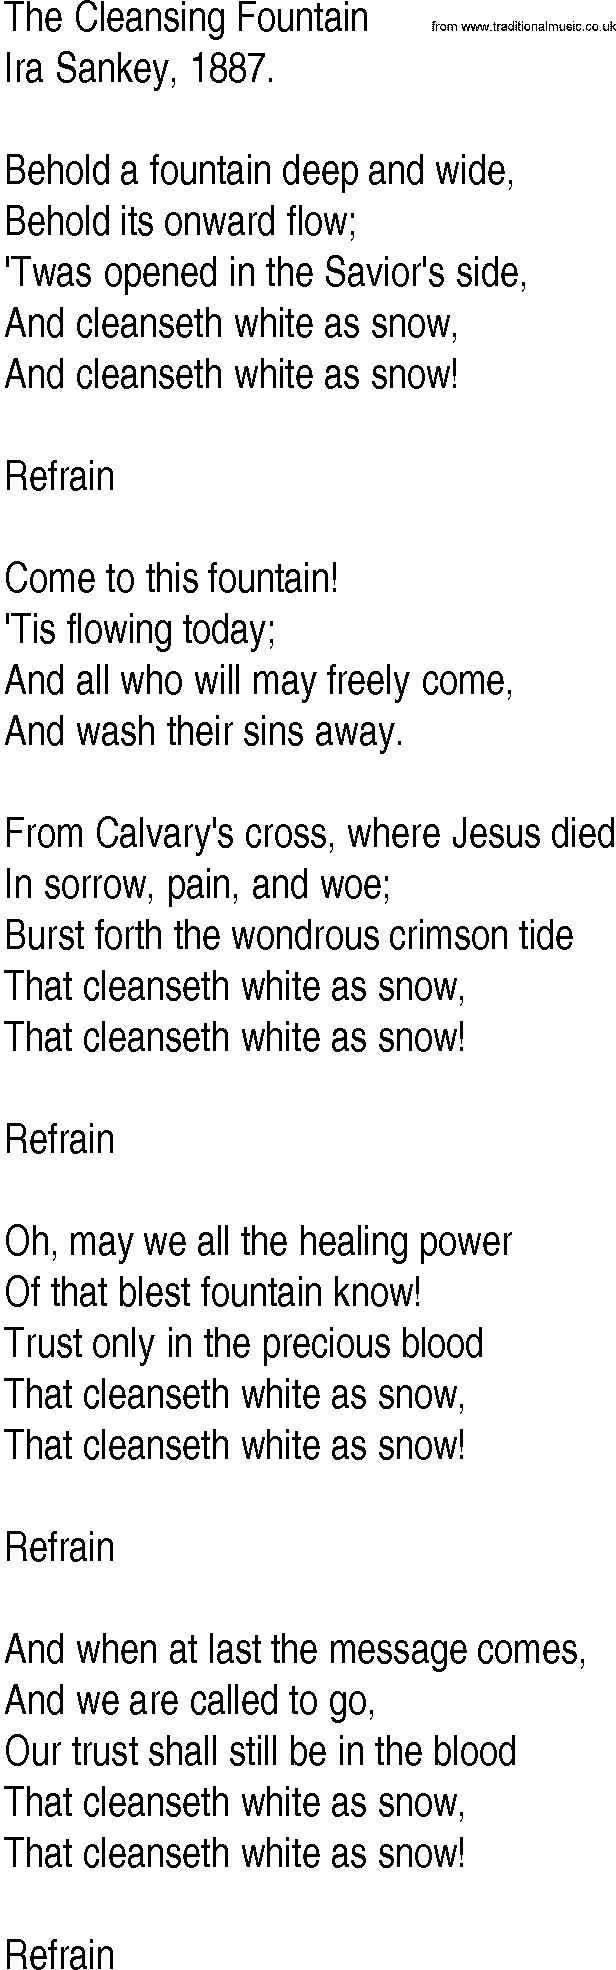 Hymn and Gospel Song: The Cleansing Fountain by Ira Sankey lyrics